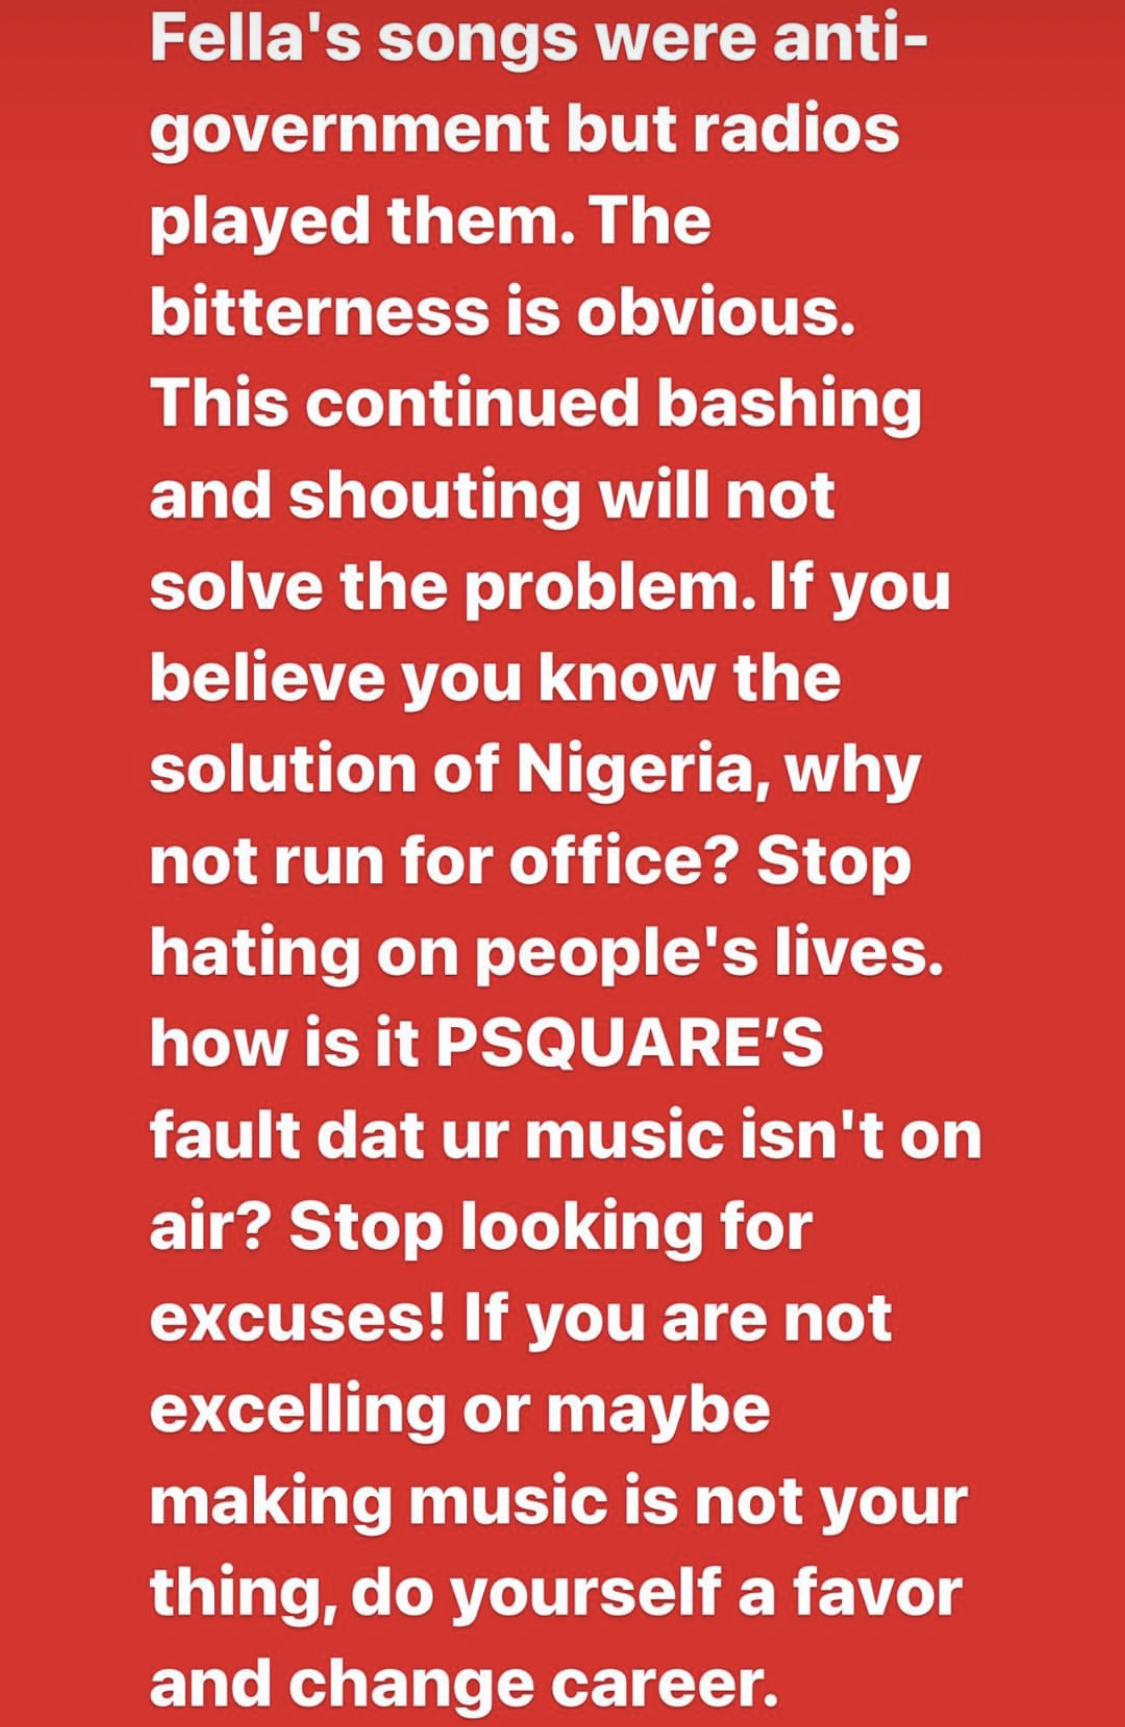 If not for your father Fela, nobody knows you - Peter Okoye blasts Seun Kuti for criticizing him over Peter Obi